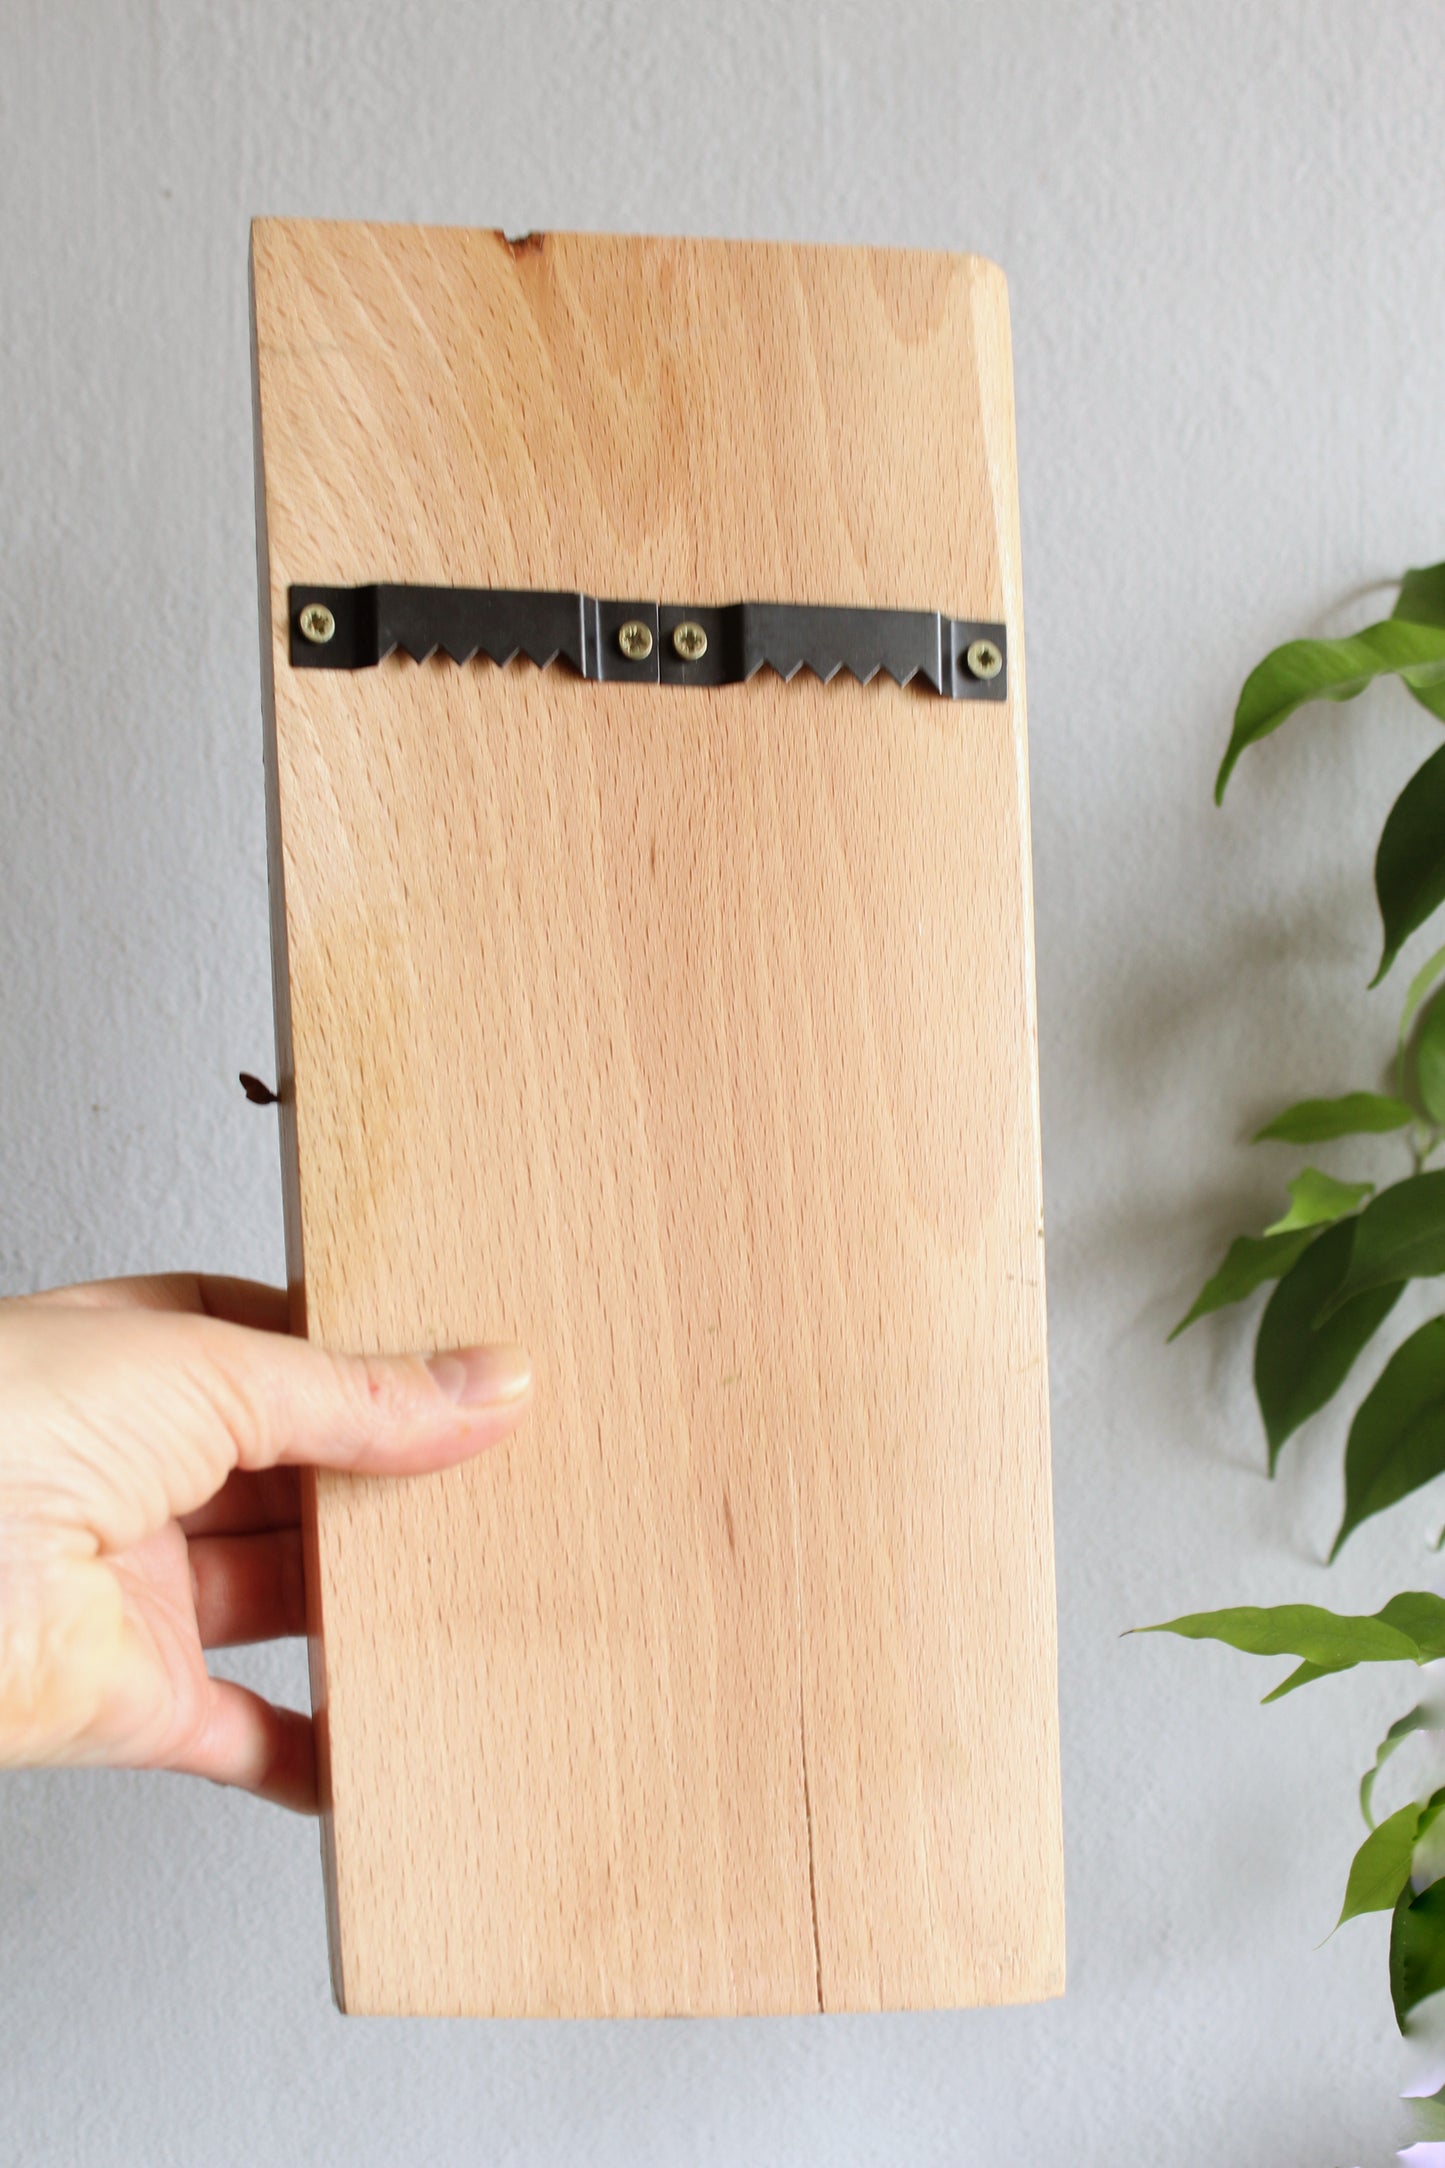 Key holder for wall, wooden house key hook